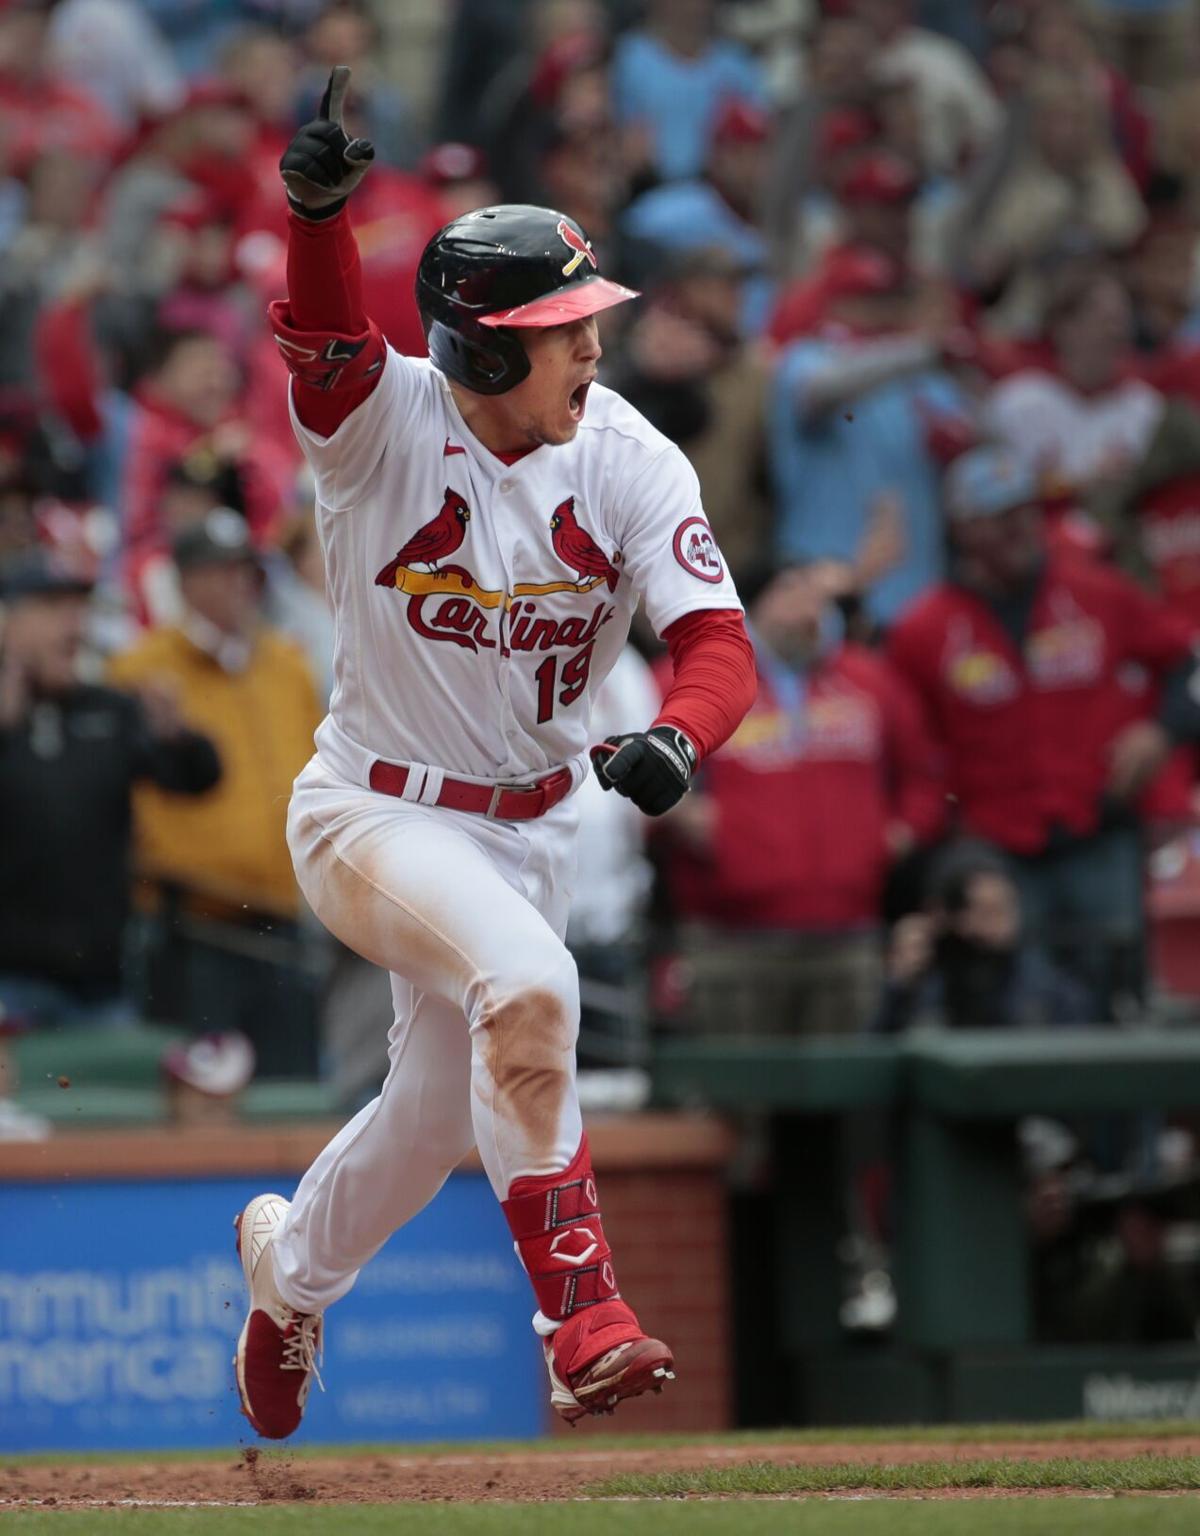 WATCH: St. Louis Cardinals Walk Off Pirates with Tommy Edman RBI